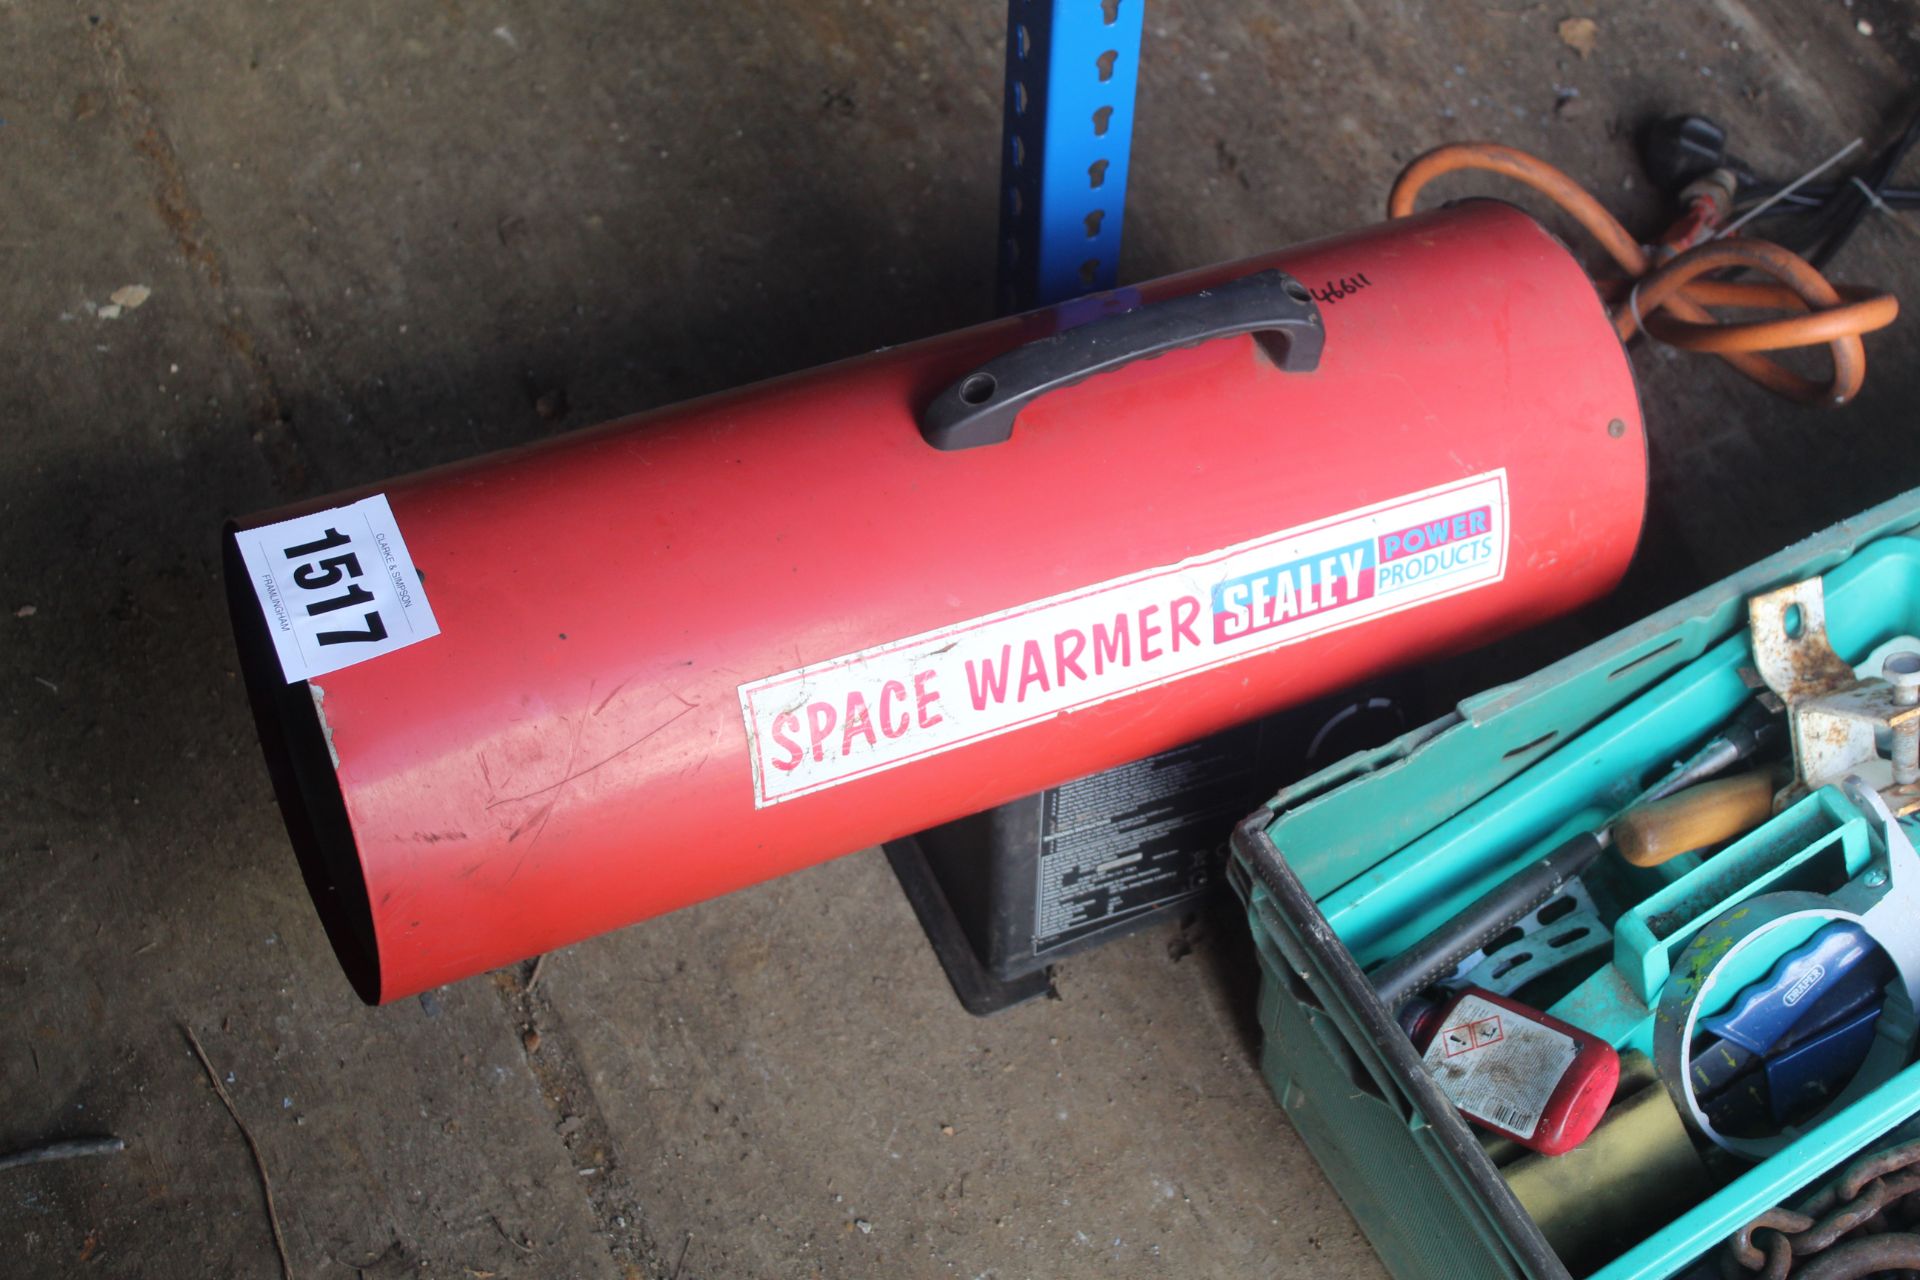 Sealey gas space heater. V